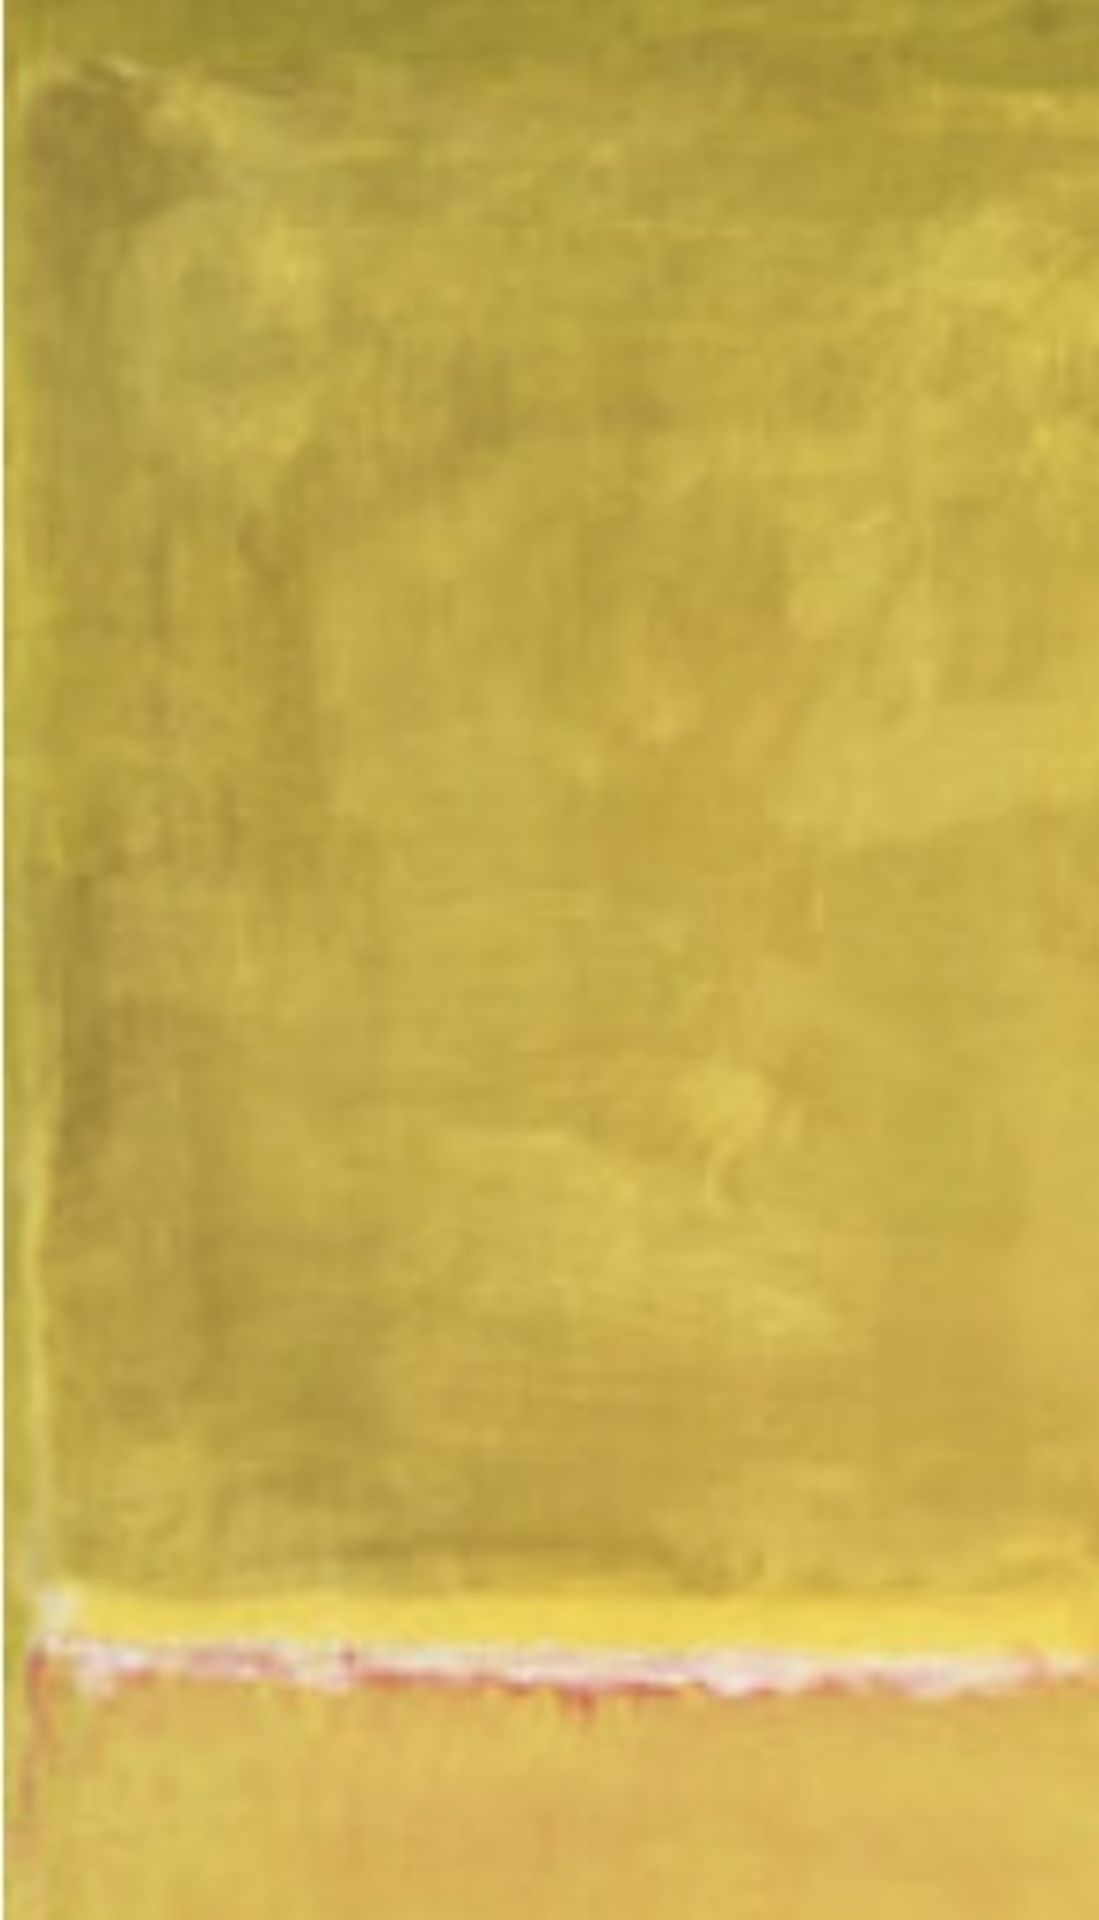 Mark Rothko "Yellow" Offset Lithograph - Image 2 of 5